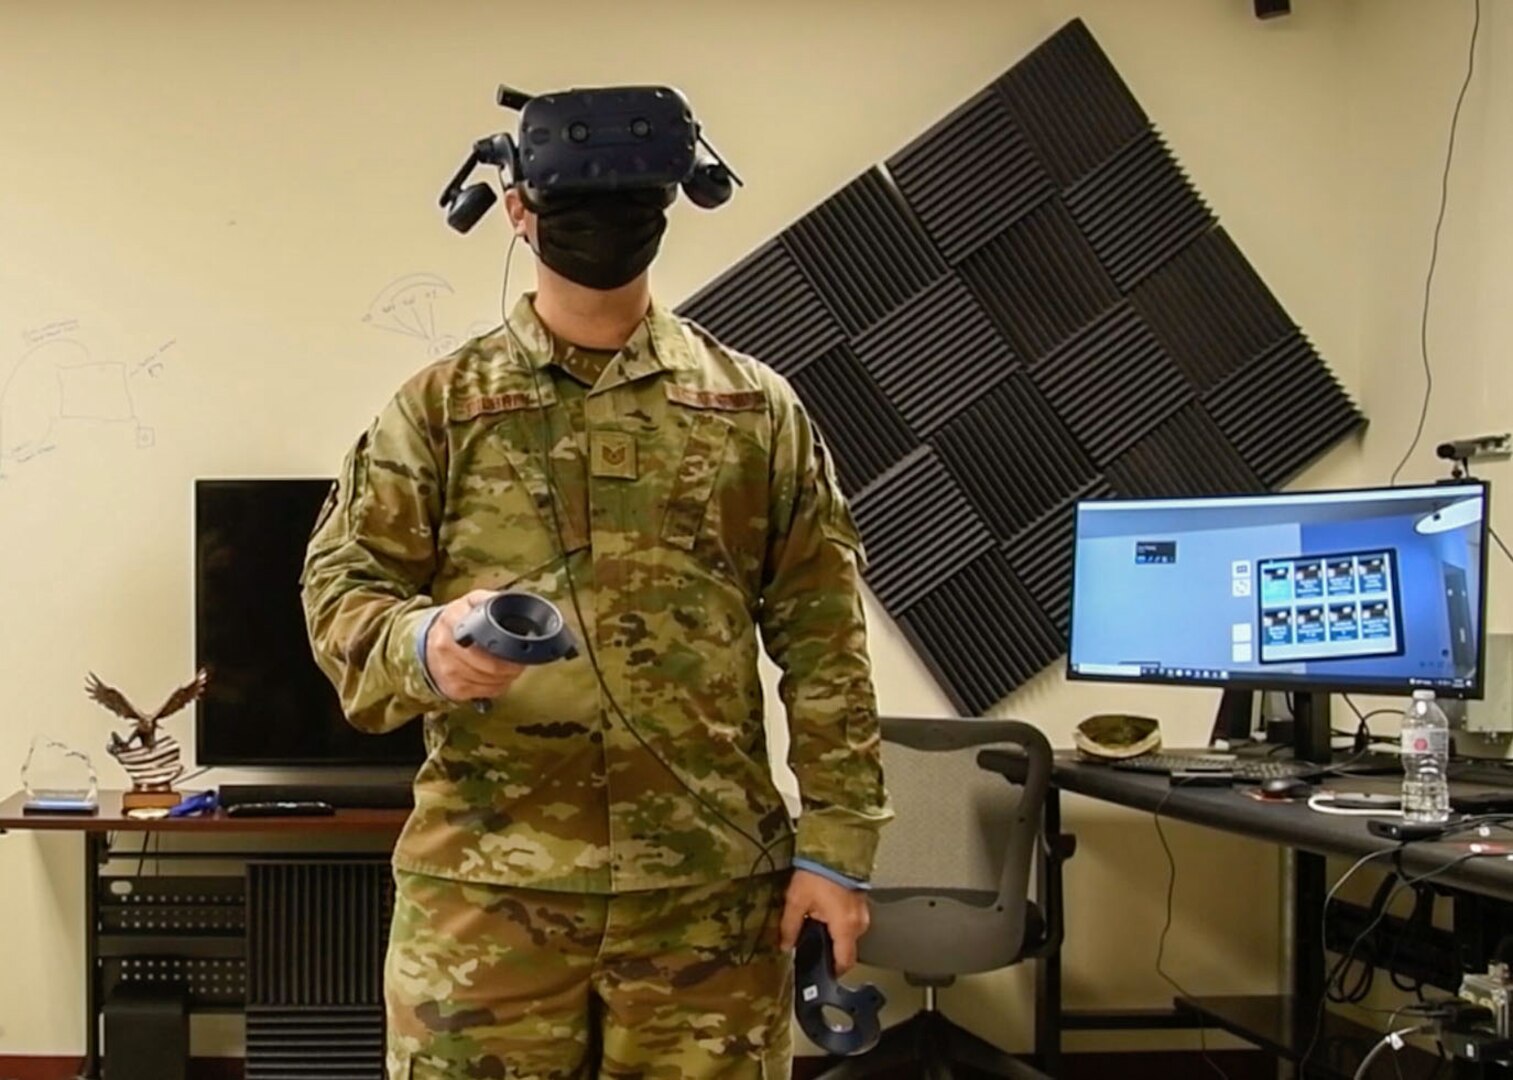 Hauversburk is the artificial intelligence and machine learning team lead of the Alamo Spark Cell and coordinates problem solving, solution implementation, industry outreach, and training. The Alamo Spark Cell created virtual and augmented reality supplemental training aids and set up a space with virtual reality headsets within the student dormitory.